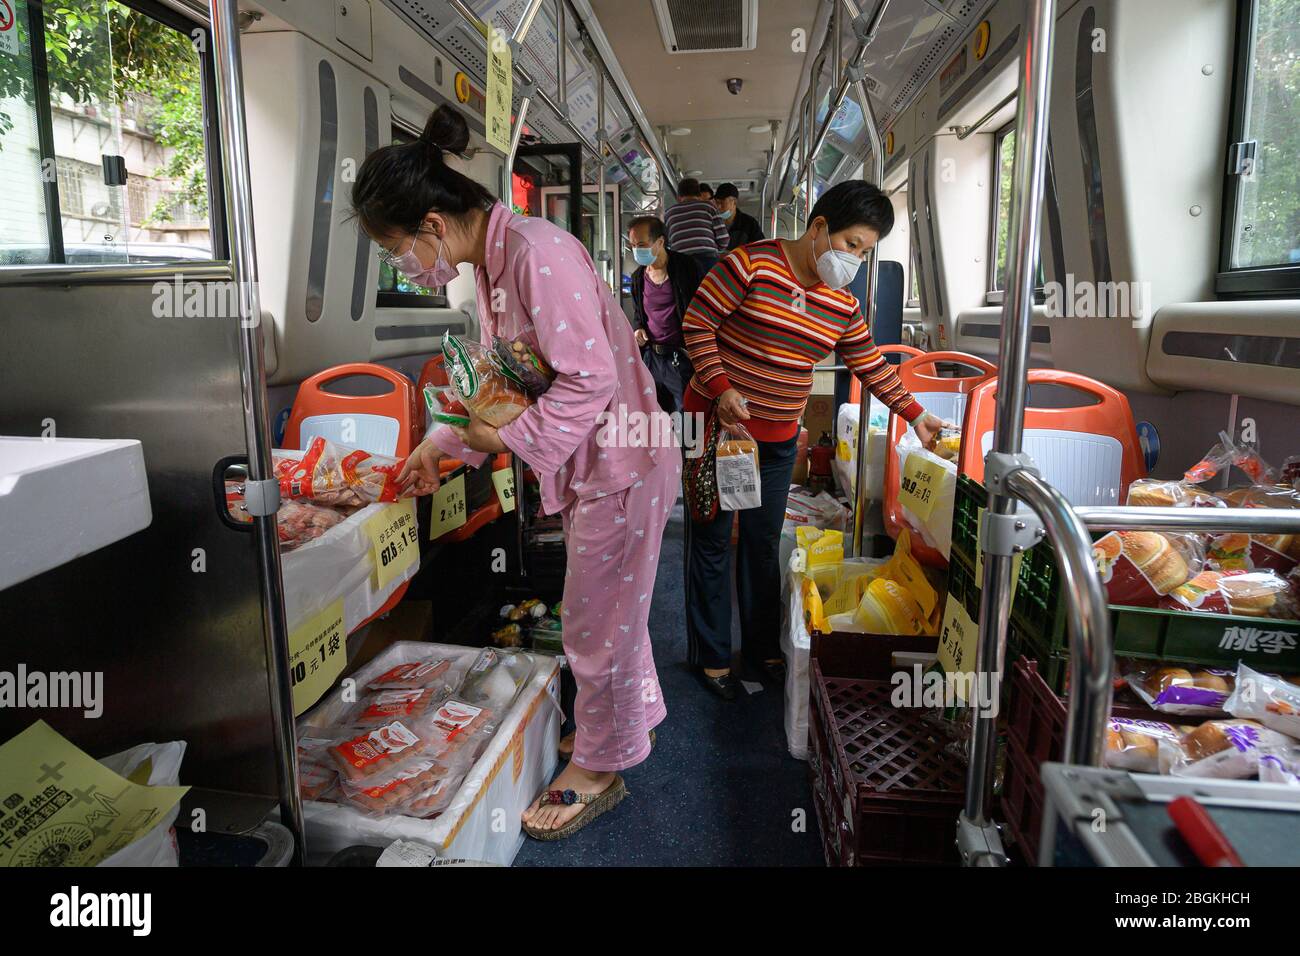 Residents purchase at the bus supermarket, which is a cooperation of local bus service and supermarket for citizens' convenience, Guangzhou city, sout Stock Photo